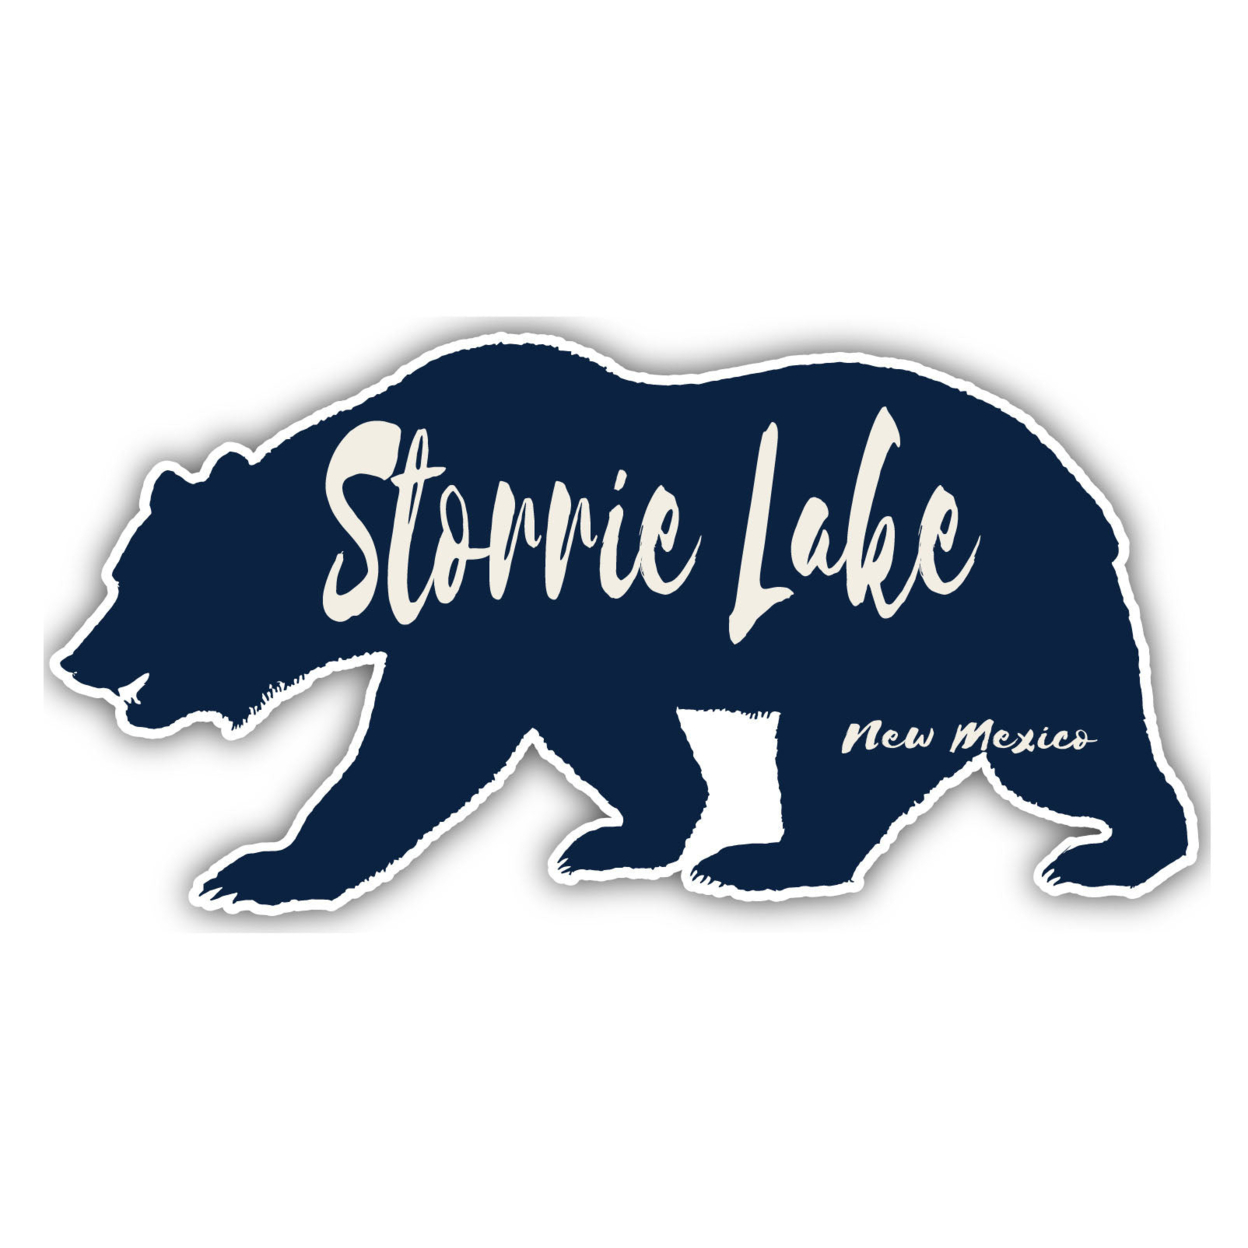 Storrie Lake New Mexico Souvenir Decorative Stickers (Choose Theme And Size) - Single Unit, 4-Inch, Bear